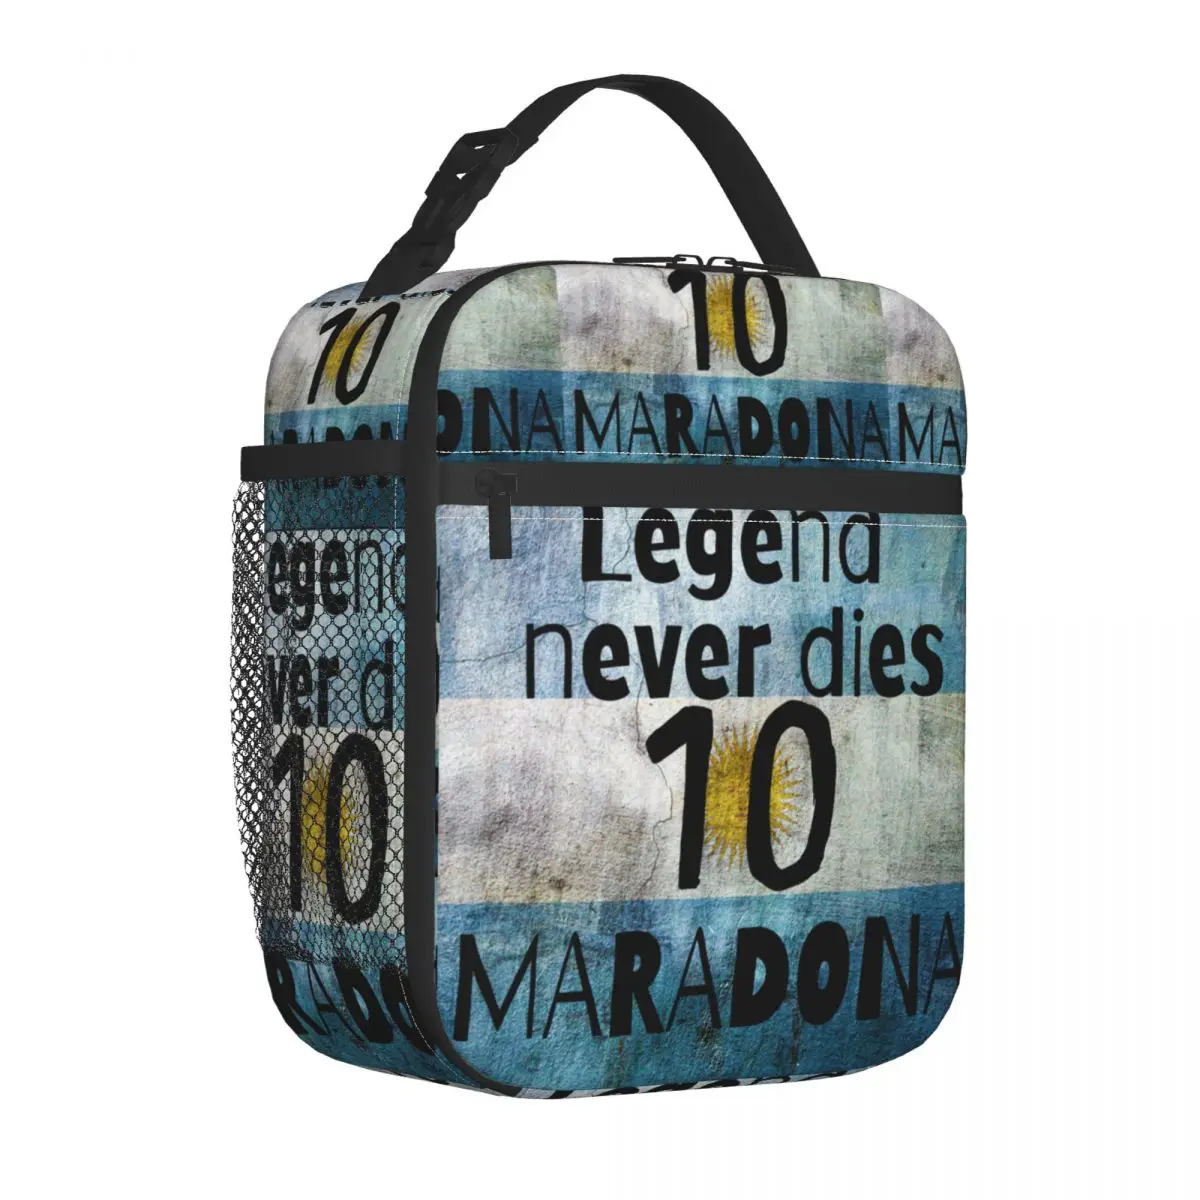 

Legend Never Dies Diego Maradona Poster Insulated Lunch Bags Football Soccer Meal Container Cooler Bag Tote Lunch Box Travel